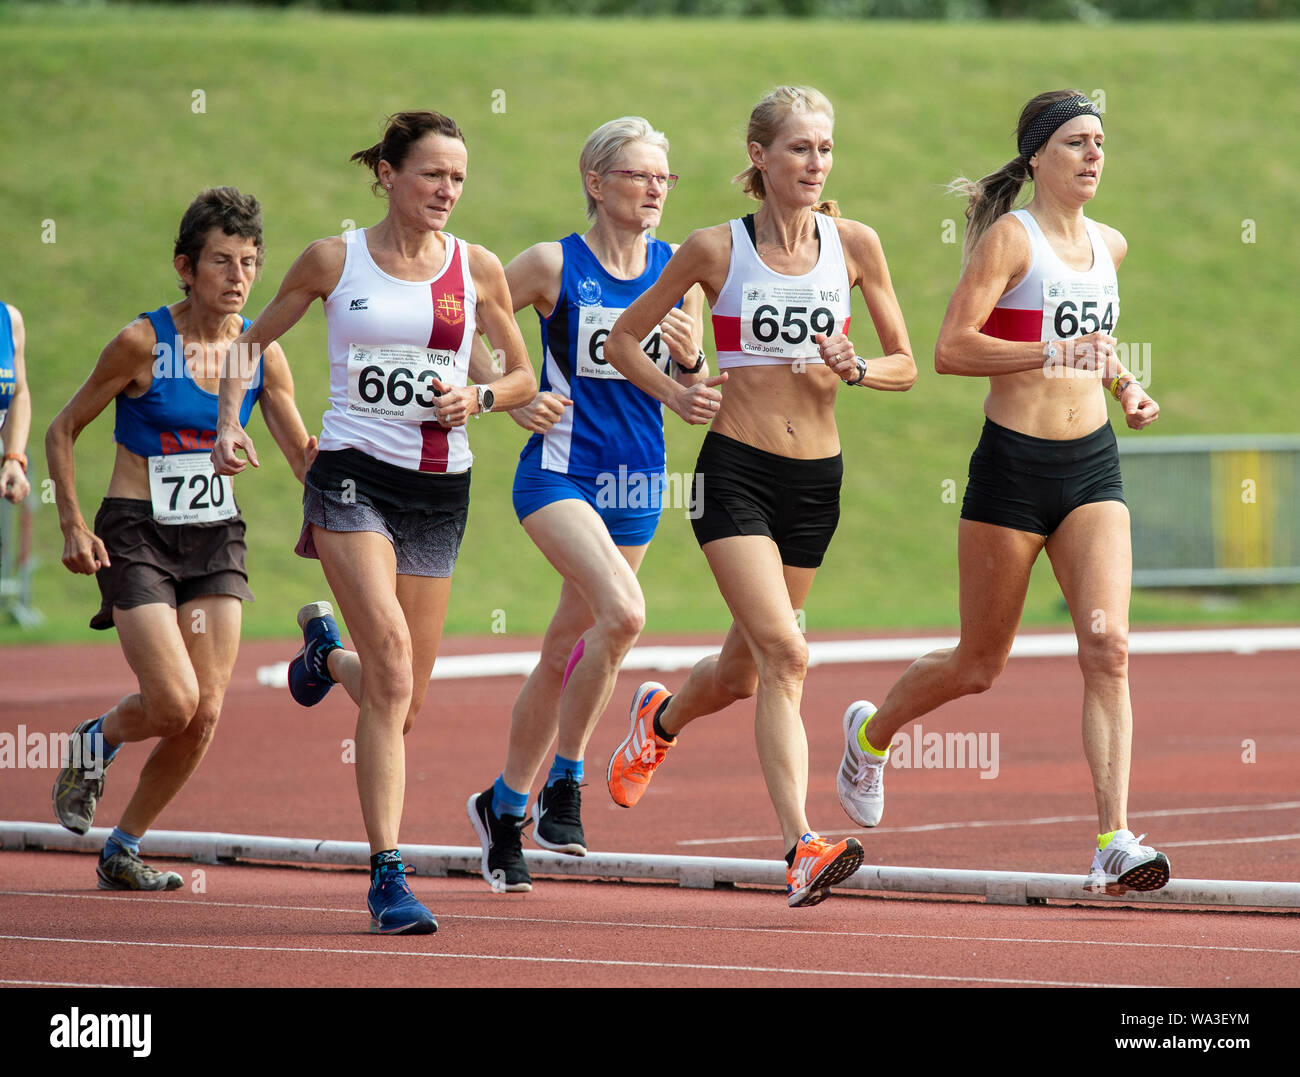 BIRMINGHAM - ENGLAND 10 AUG 2019: Susan McDonald (663) Clare Jolliffe (659) Sarah Everitte (654) competing in the 1500m  on Day two of the British Mas Stock Photo